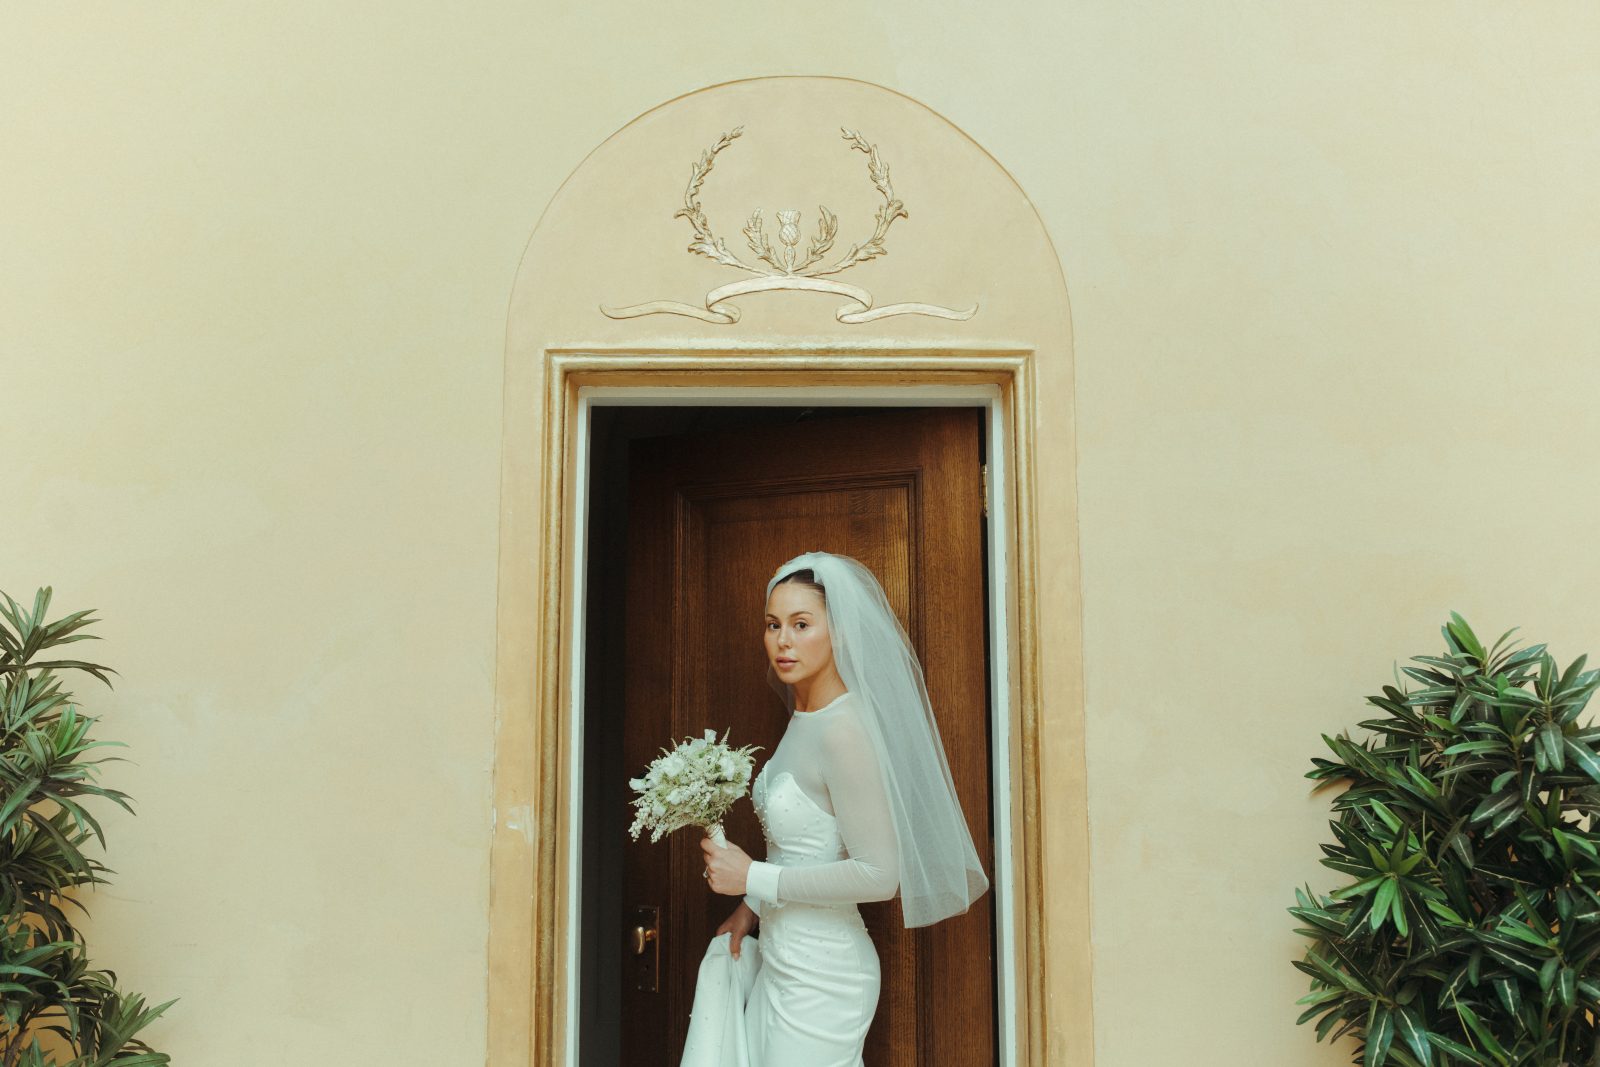 A glamorous Calyx bride holding a white posy bouquet entering a door at the Banff Fairmont